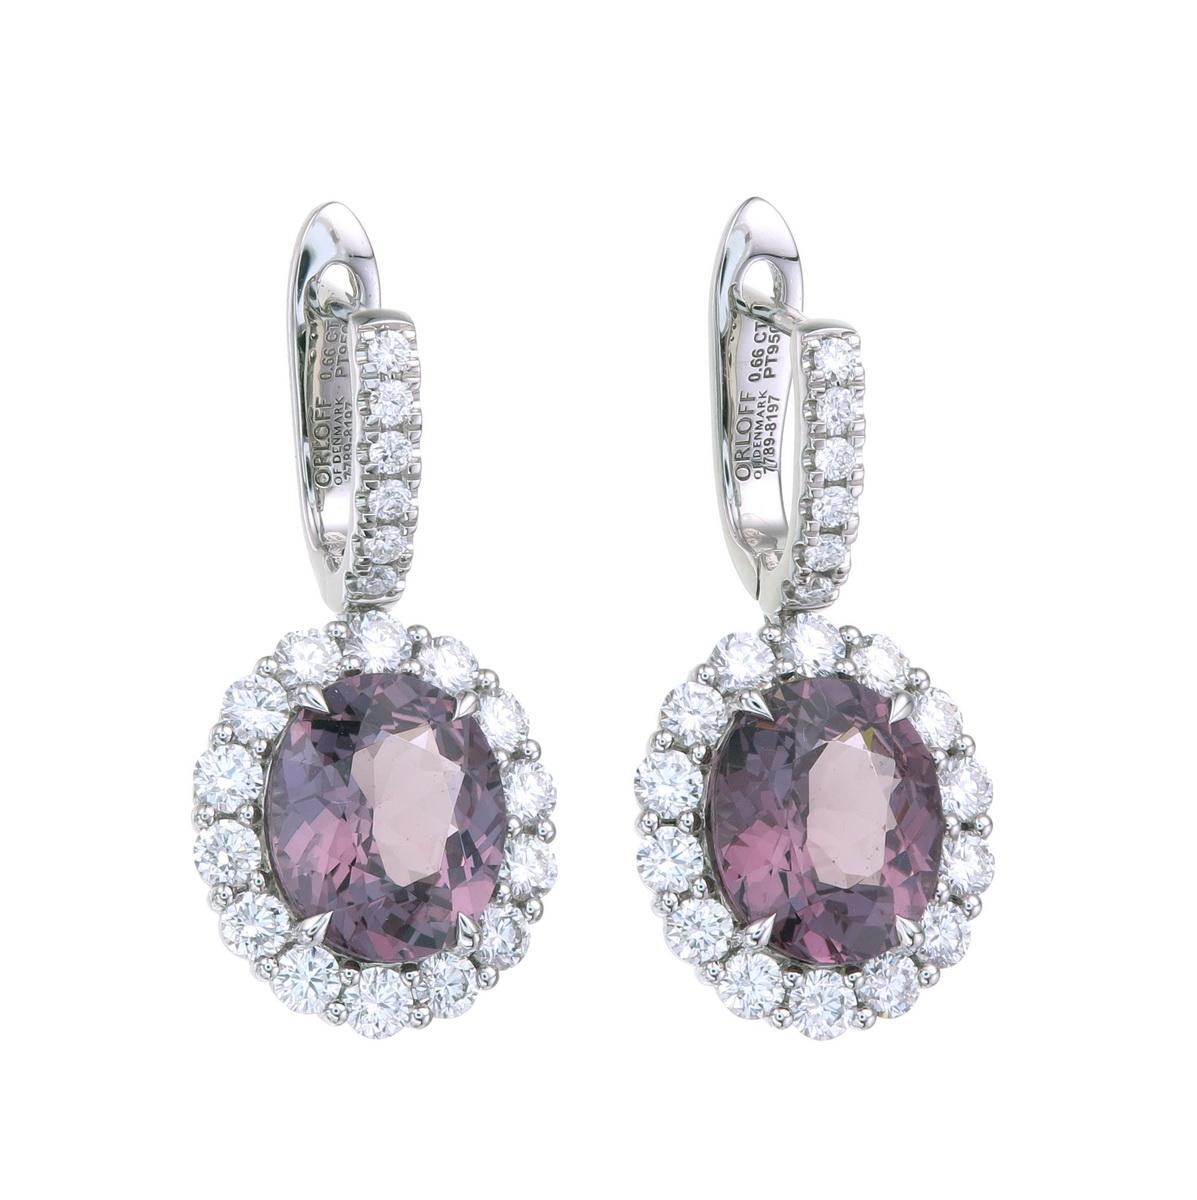 Orloff of Denmark's own; 'Orchid Geminis'
A pair of exceptional purple spinels from the 'Isle of Gems', Sri Lanka (Ceylon).
Set in 950 platinum, VS1, brilliant-cut diamonds surround the gems creating a stark and beautiful contrast of glimmering